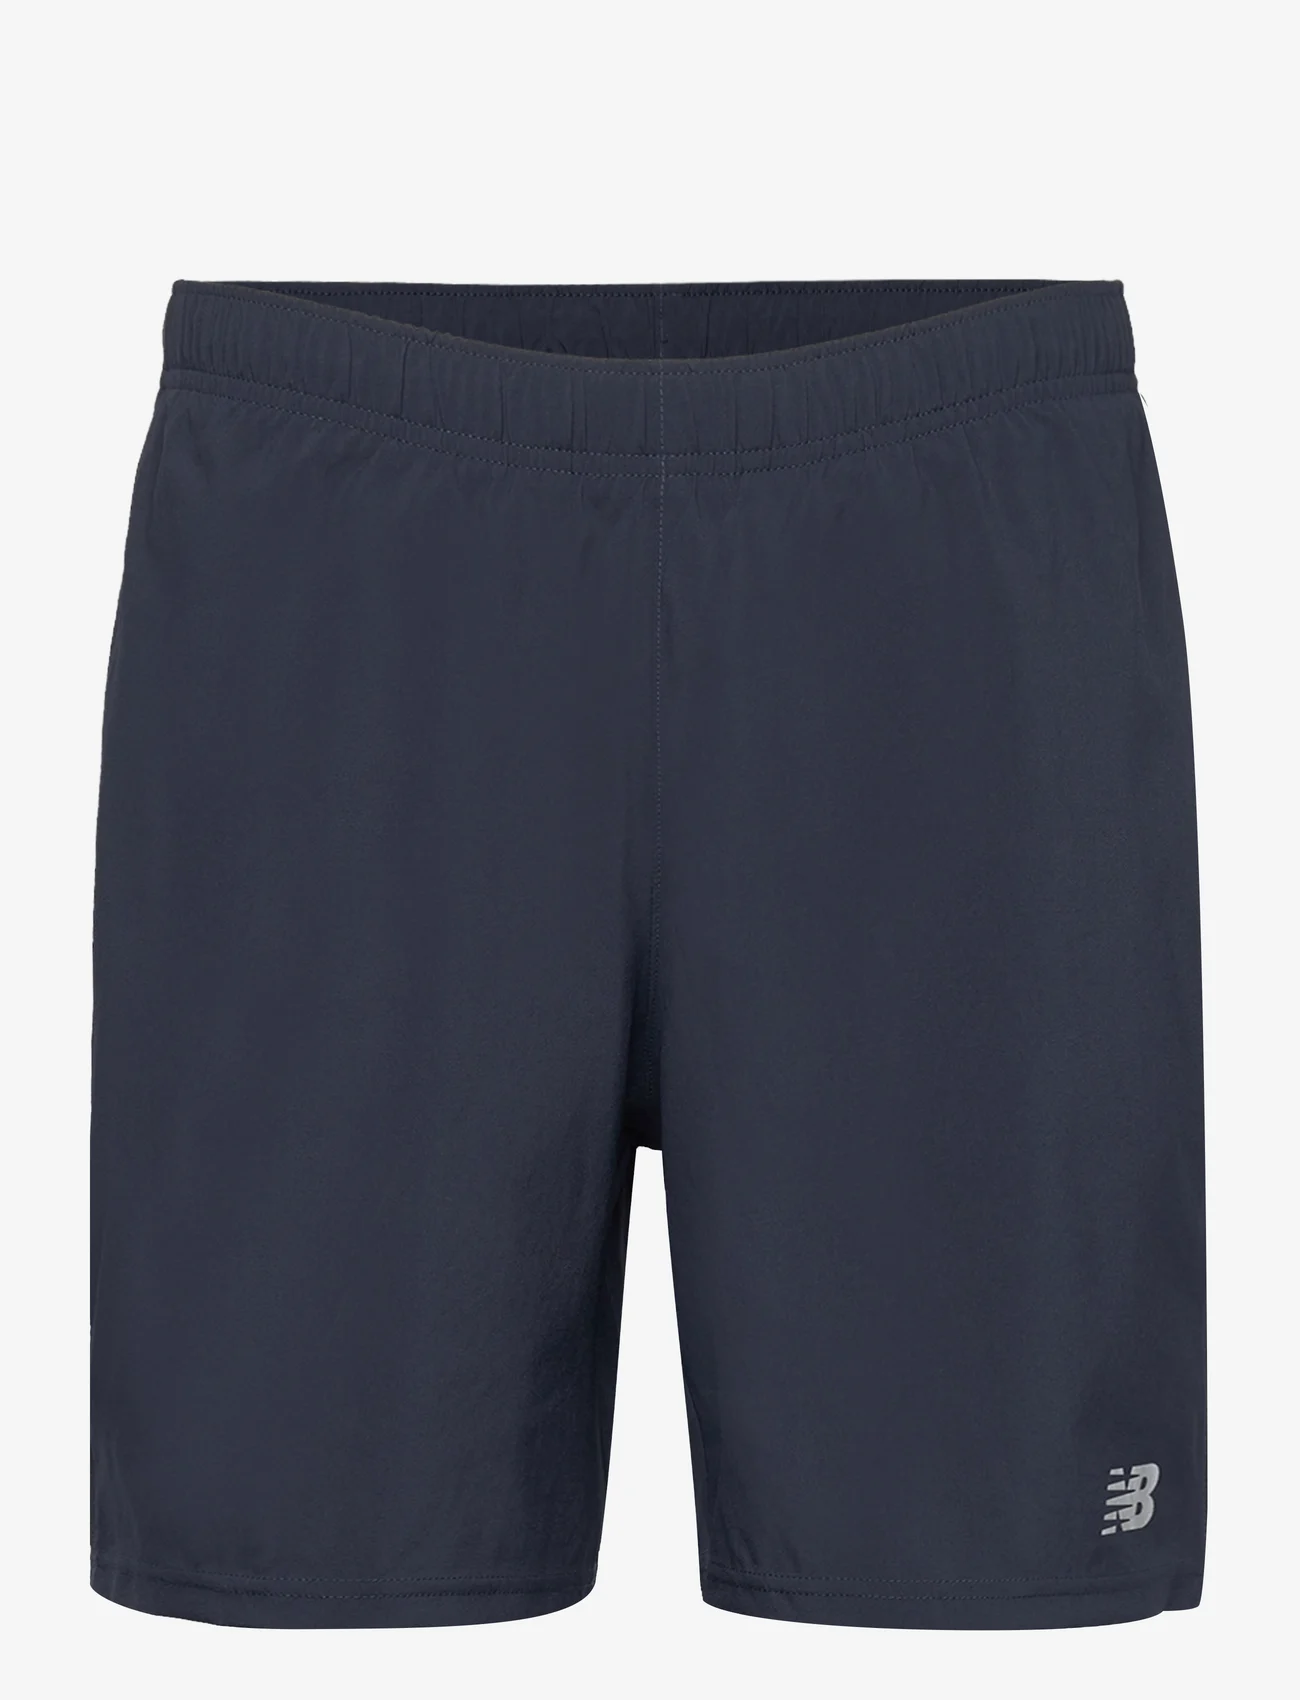 New Balance - Core Run 2 in 1 7 inch Short - træningsshorts - eclipse - 0